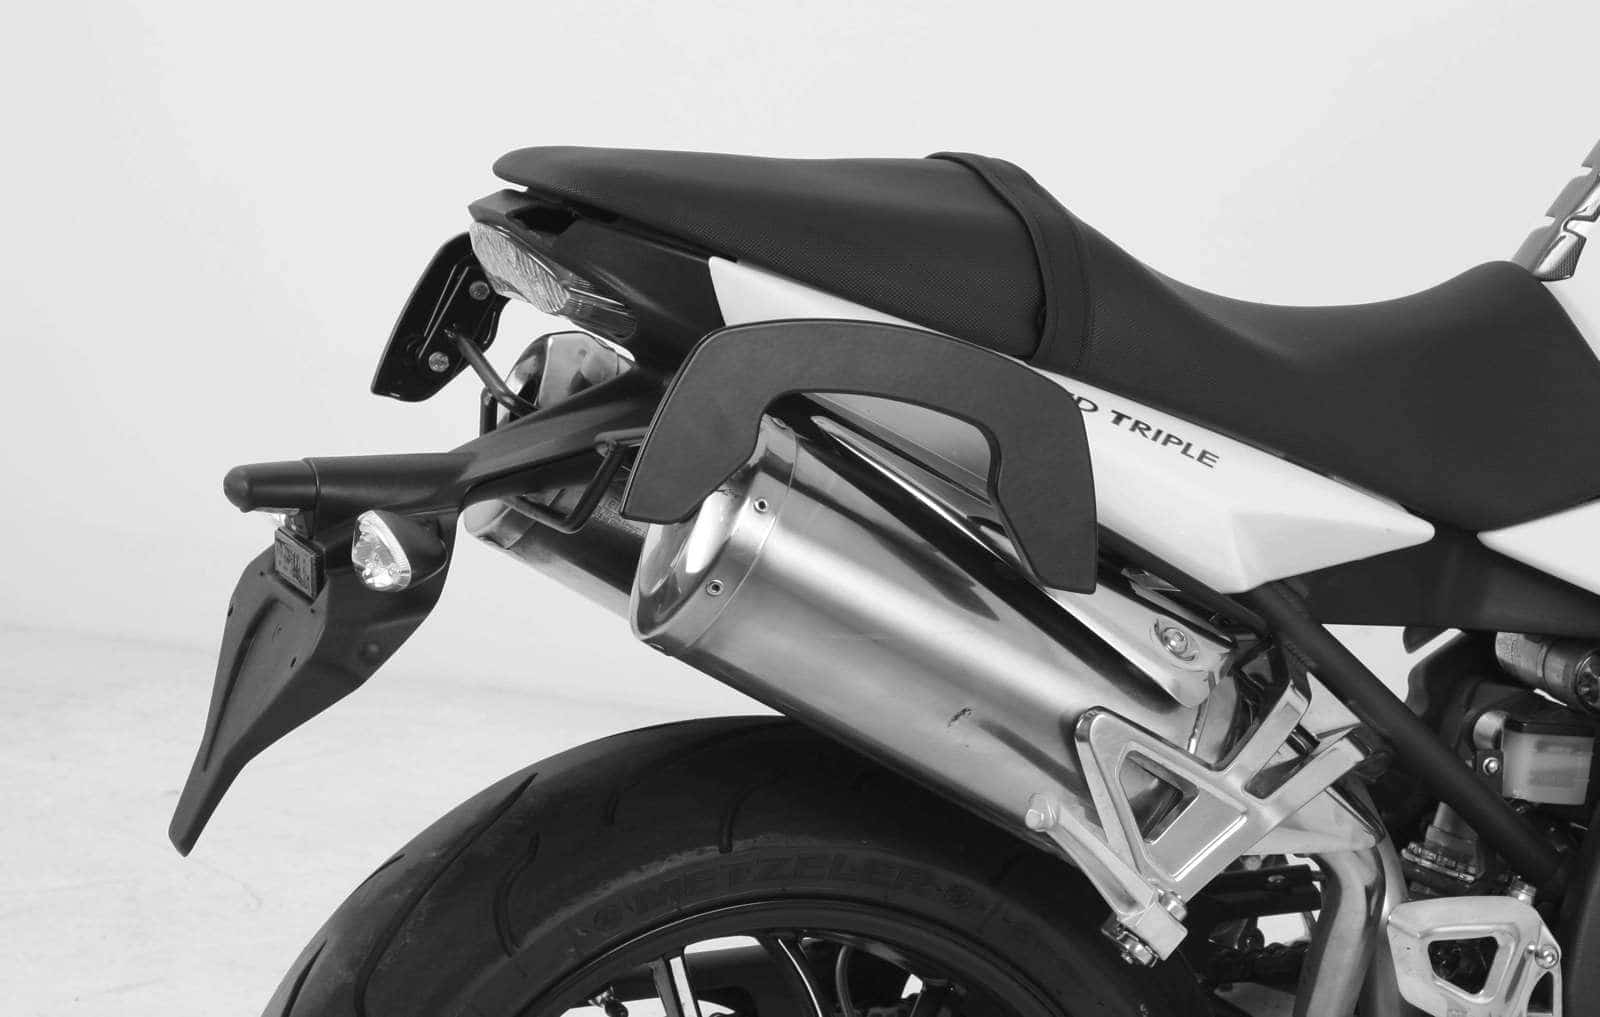 C-Bow sidecarrier for Triumph Speed Triple 1050 (2008-2010)